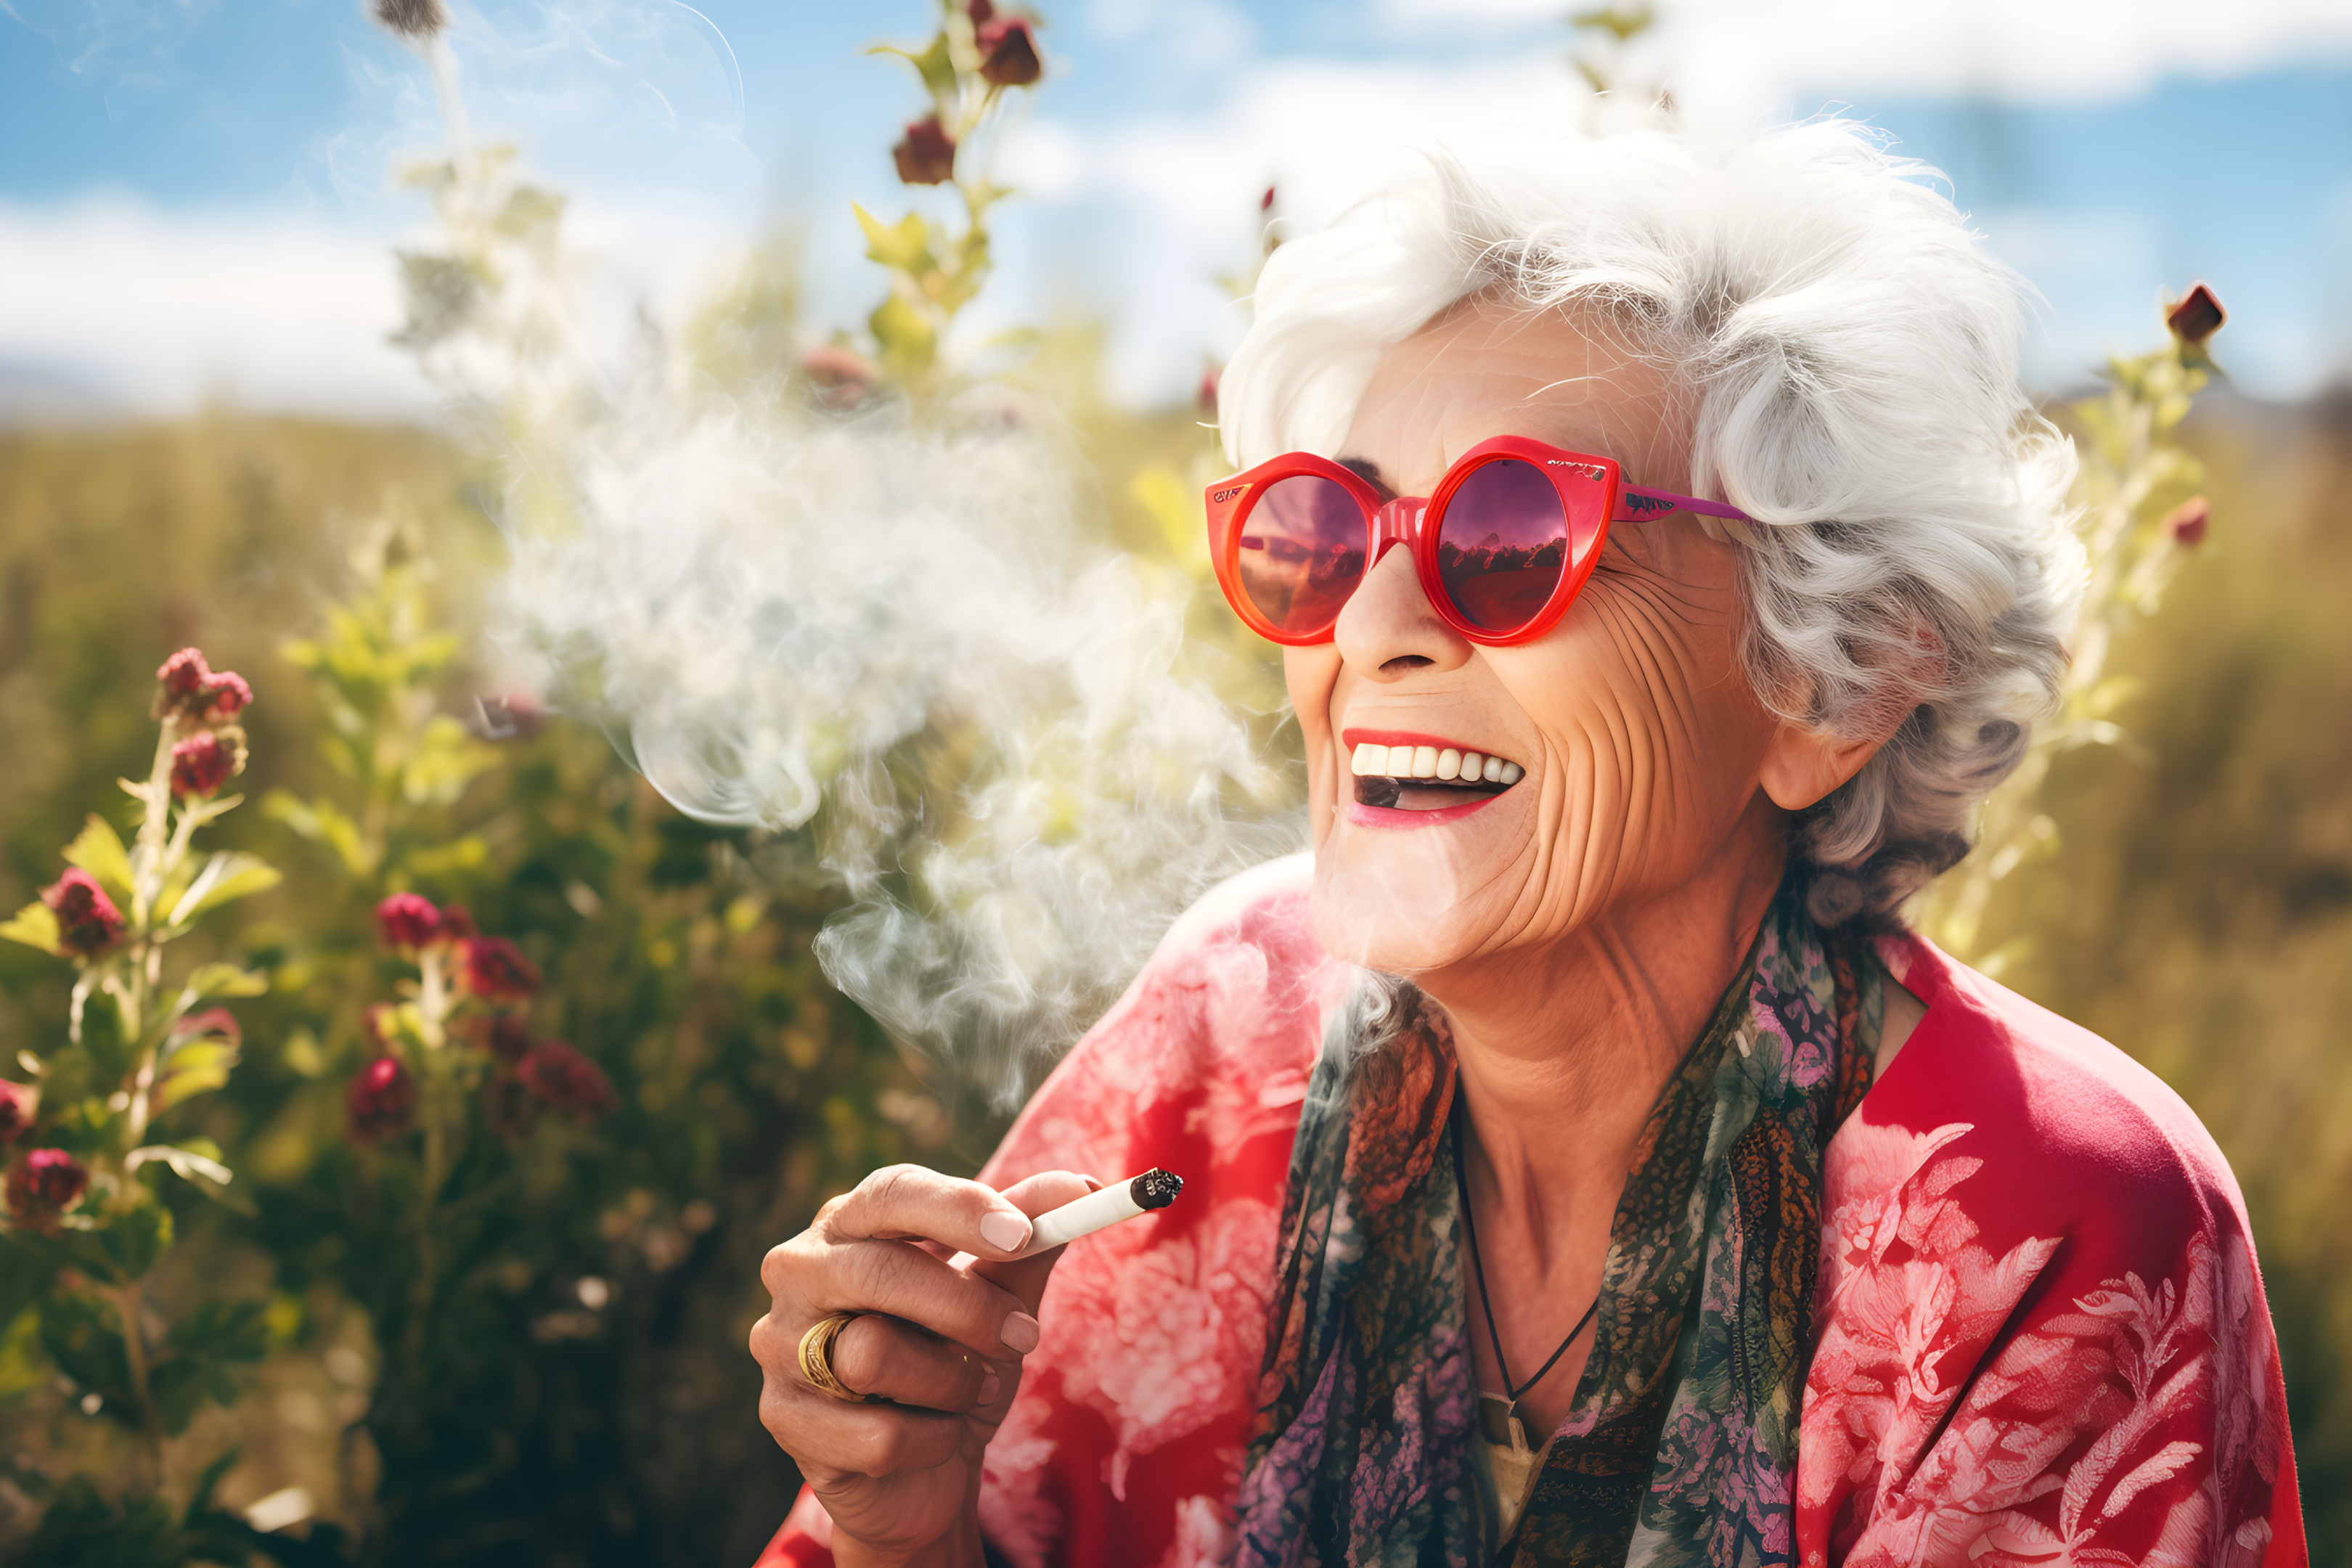 Lady enjoying medical use of marijuana. Some see it as "drug use" or legalizing "other drugs" but cannabis is believed by some users to be much better than the option to smoke tobacco. However, we have to wait to see what more research suggests.